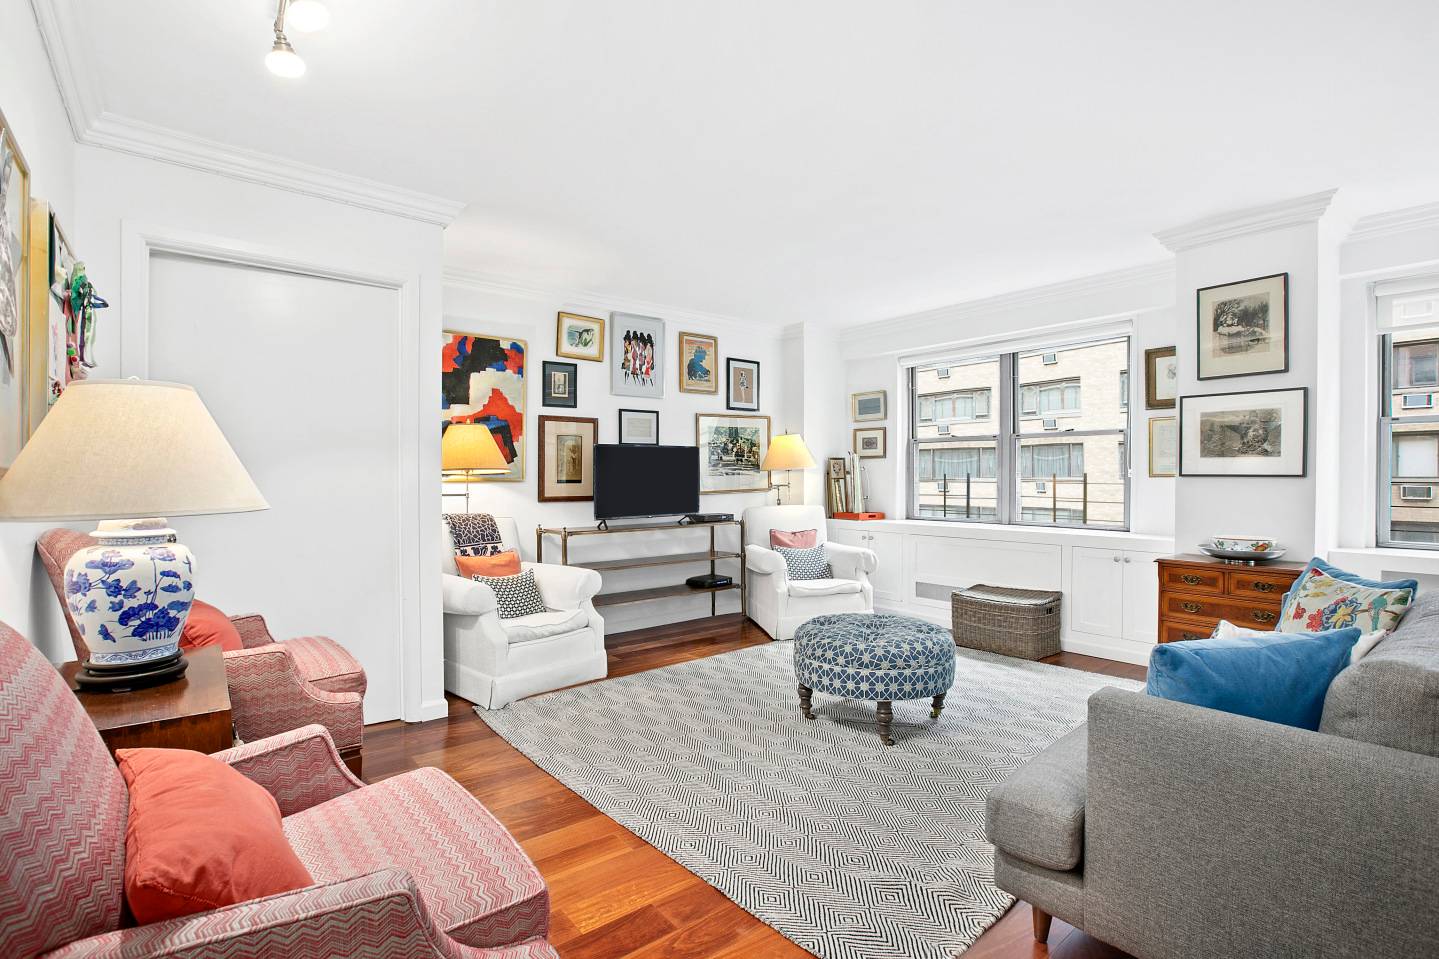 This expansive convertible three bedroom, two bathroom home features new kitchen and bathrooms, bright sunlight and amenities in the perfect Union Square location.